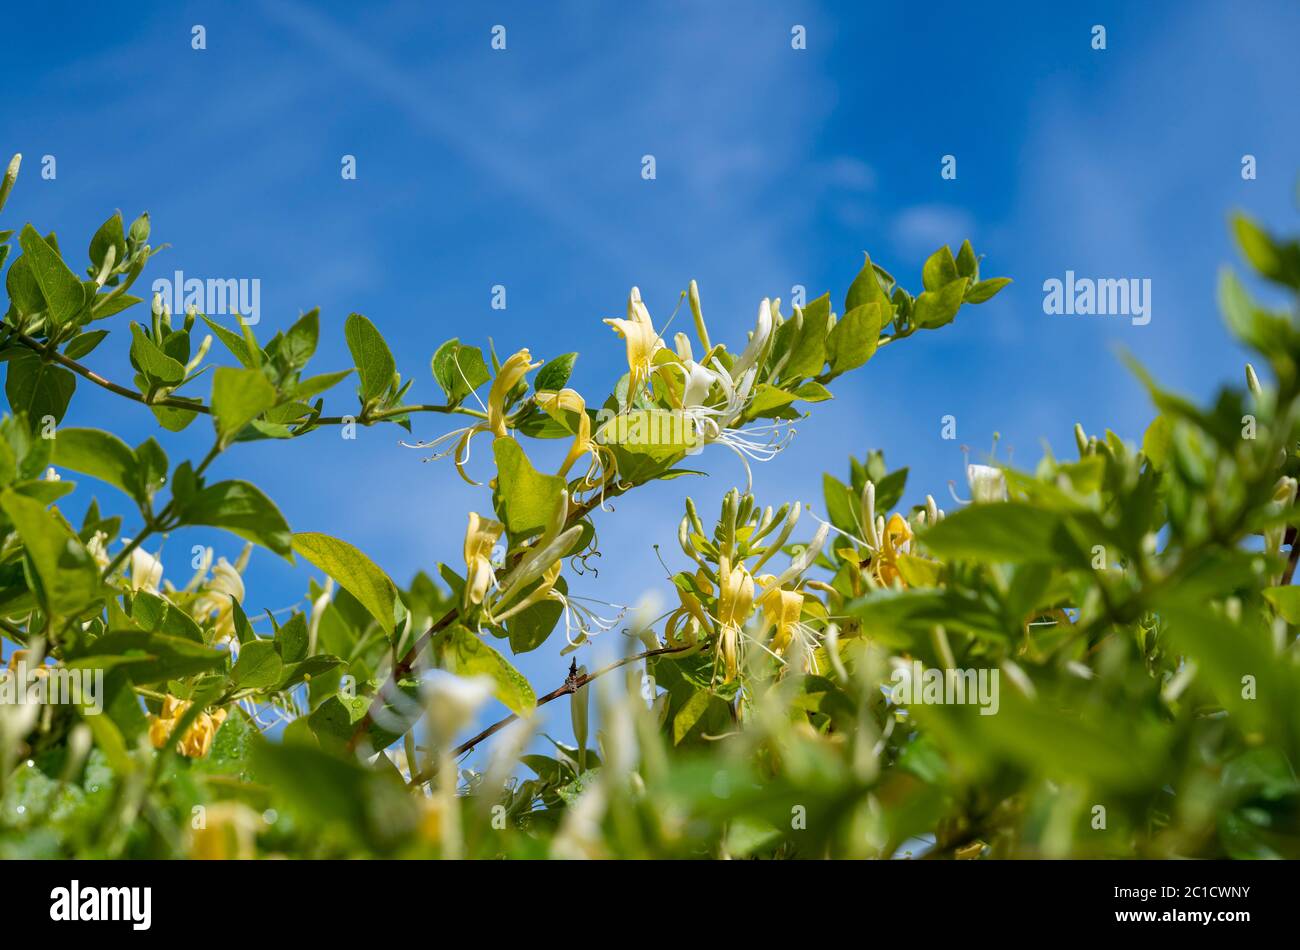 Japanese Honeysuckle vine Lonicera japonica 'Halliana'  in bloom with its delicate yellow and white flowers during the summer UK Stock Photo